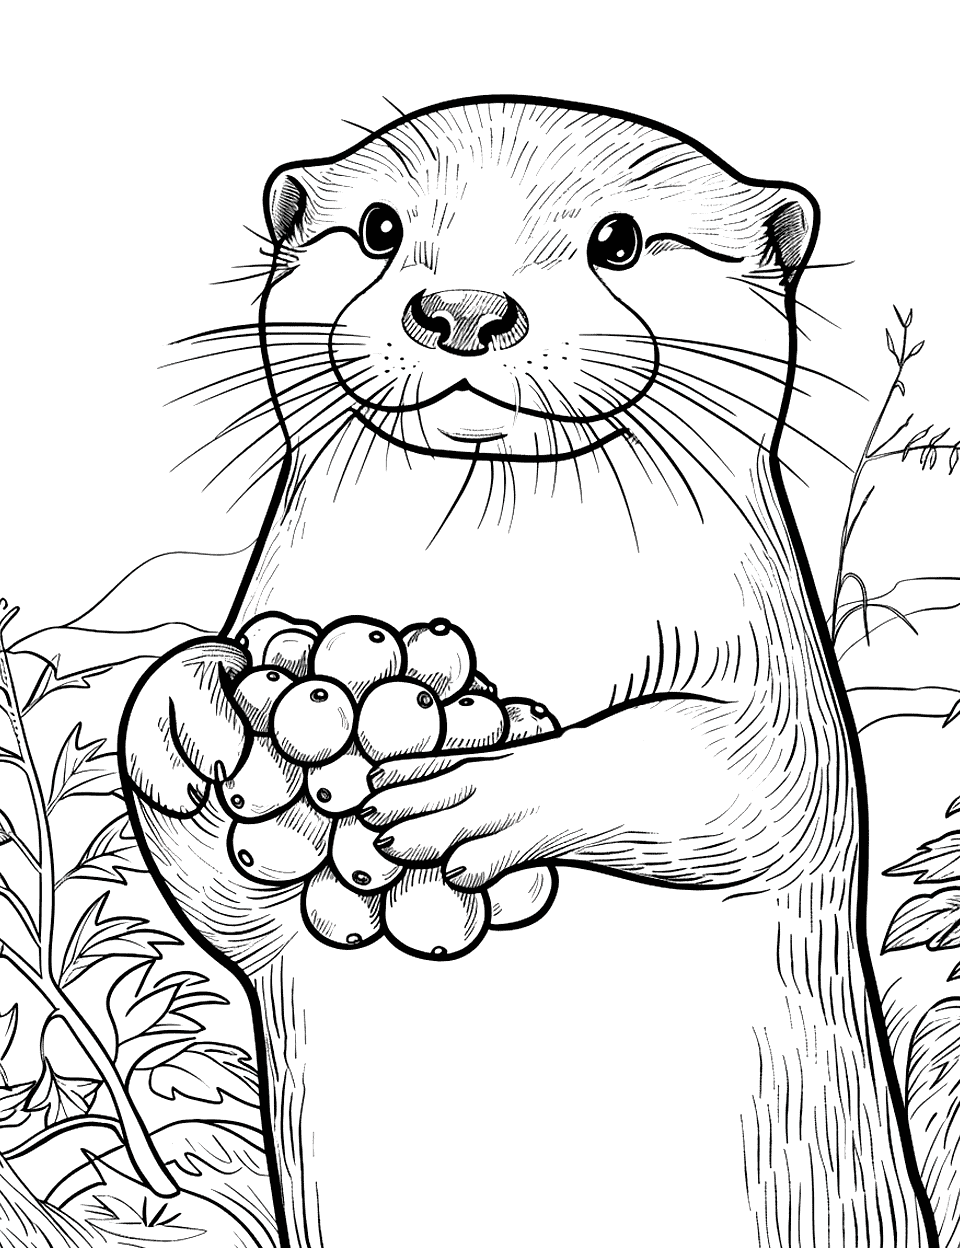 Otter with a Bunch of Berries Coloring Page - An otter holding a cluster of juicy berries, ready to snack.